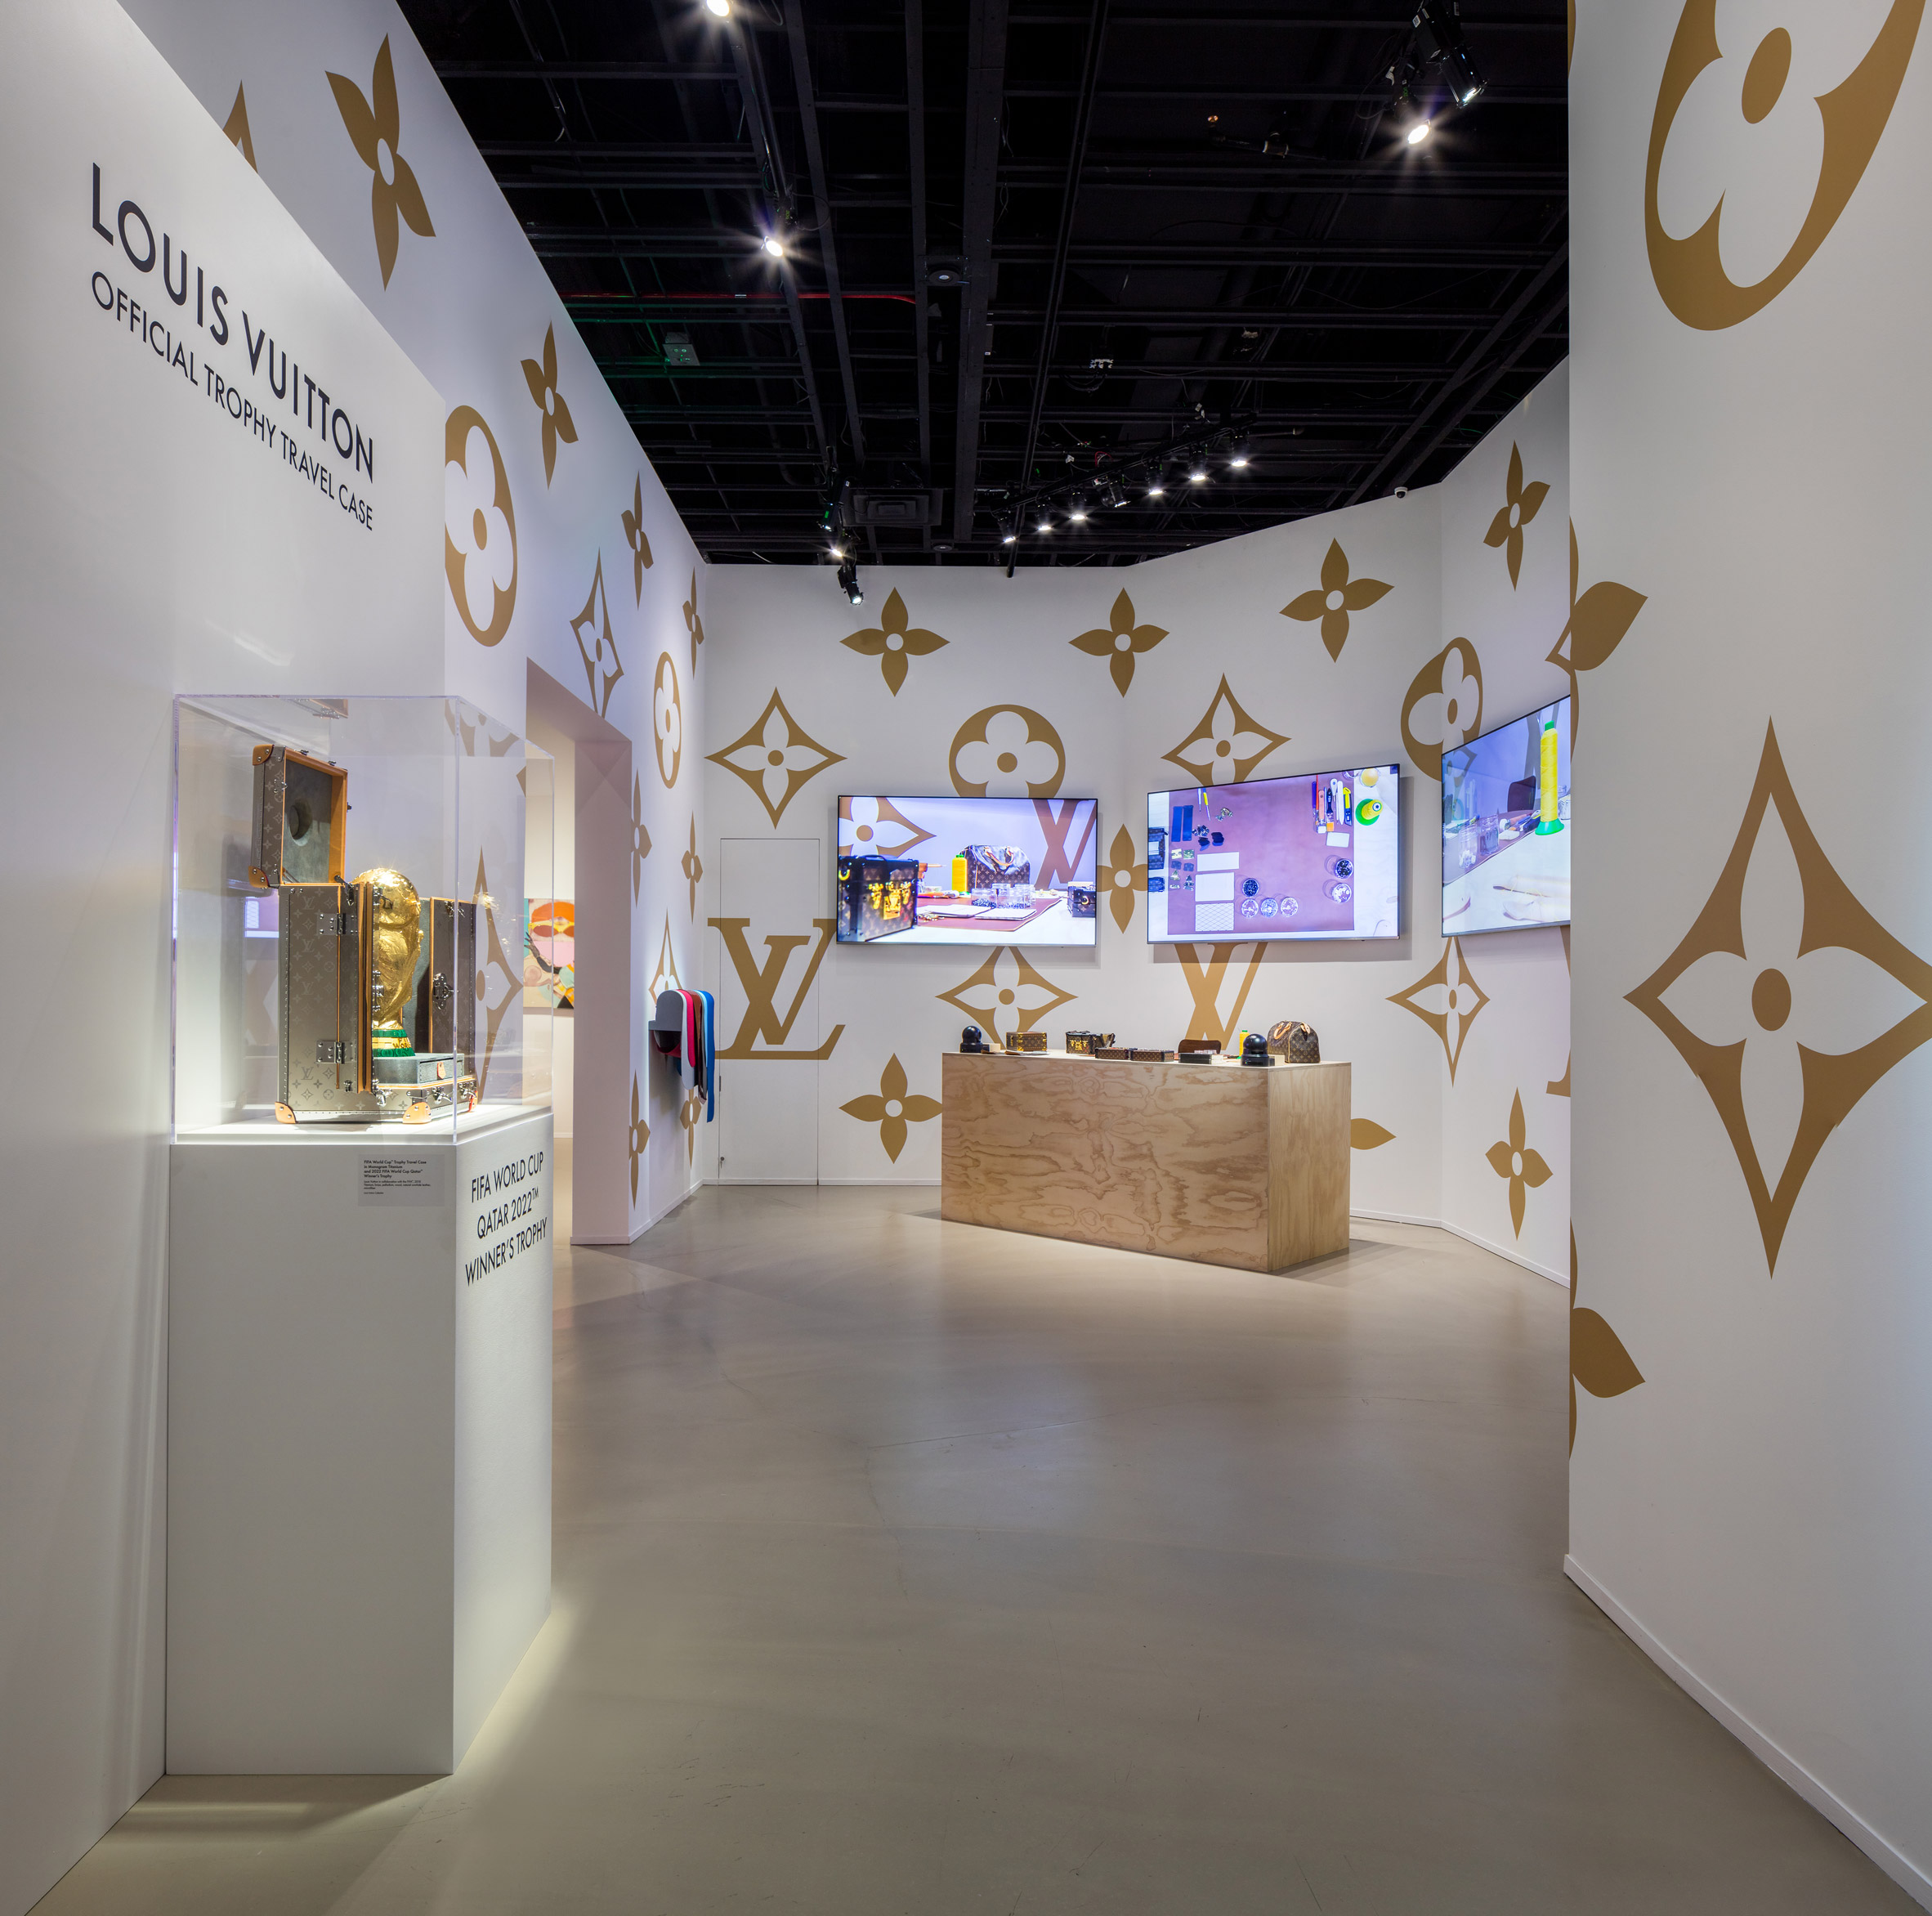 Louis Vuitton Spotlights Collaborations With Los Angeles Exhibition – WWD